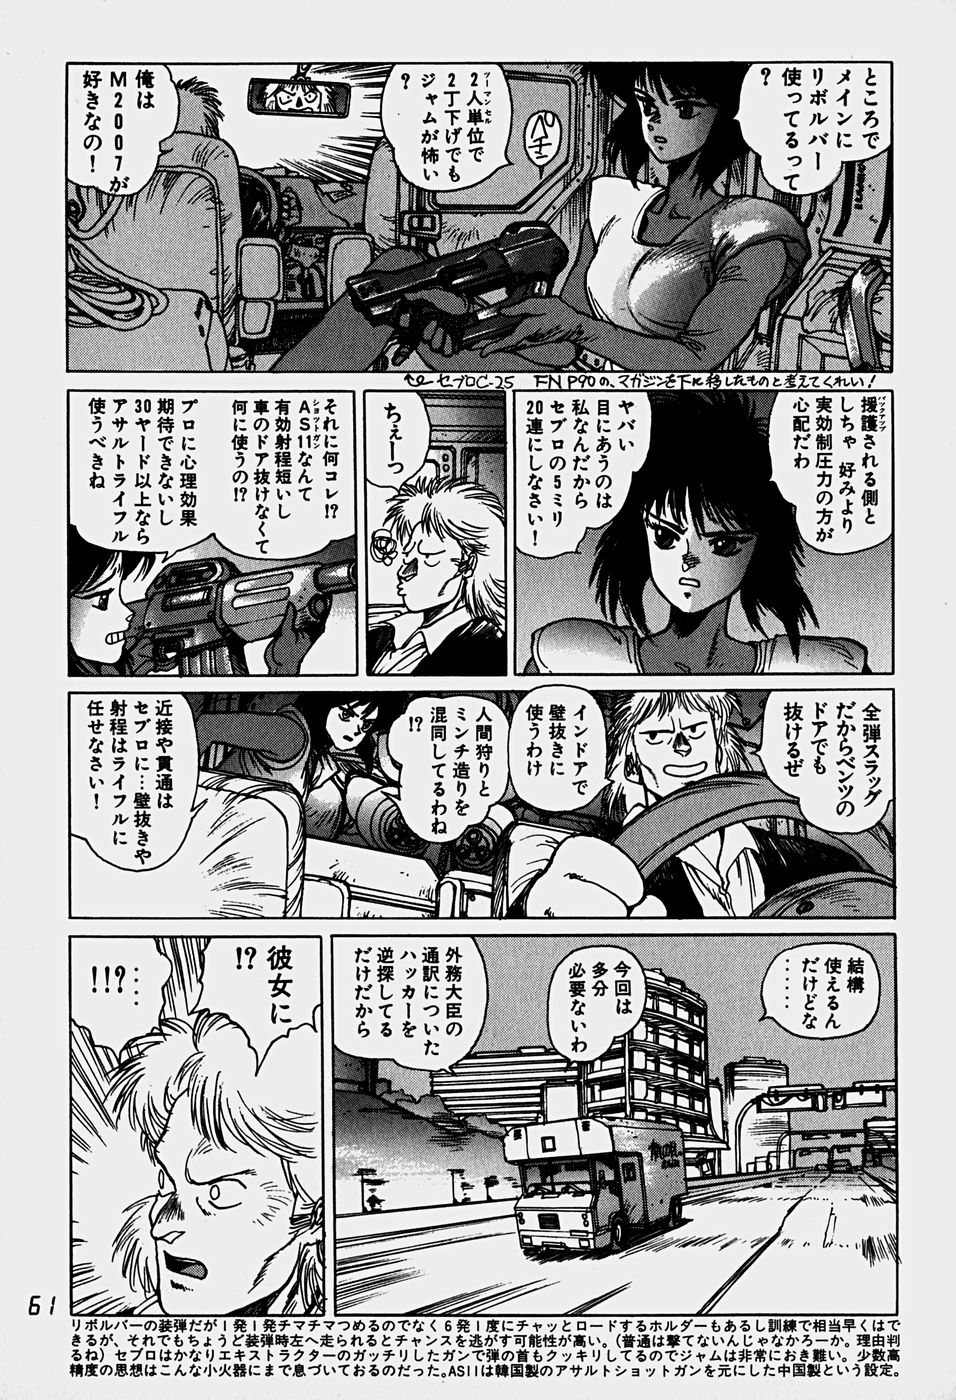 ghost in the shell 064.jpg